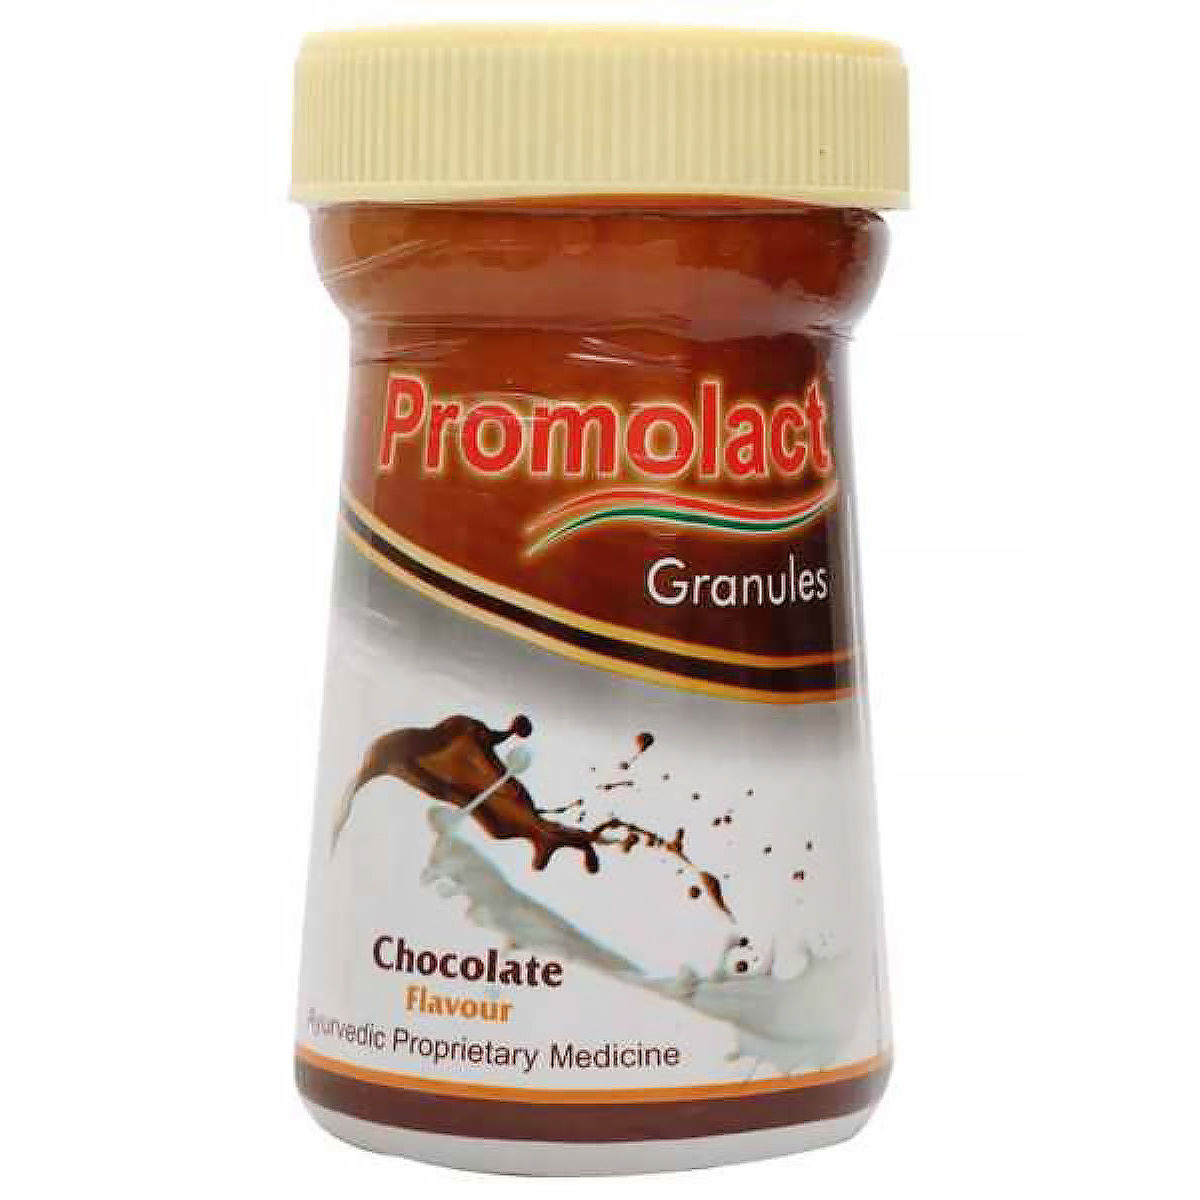 Buy Promolact Chocolate Flavour Granules, 200 gm Online